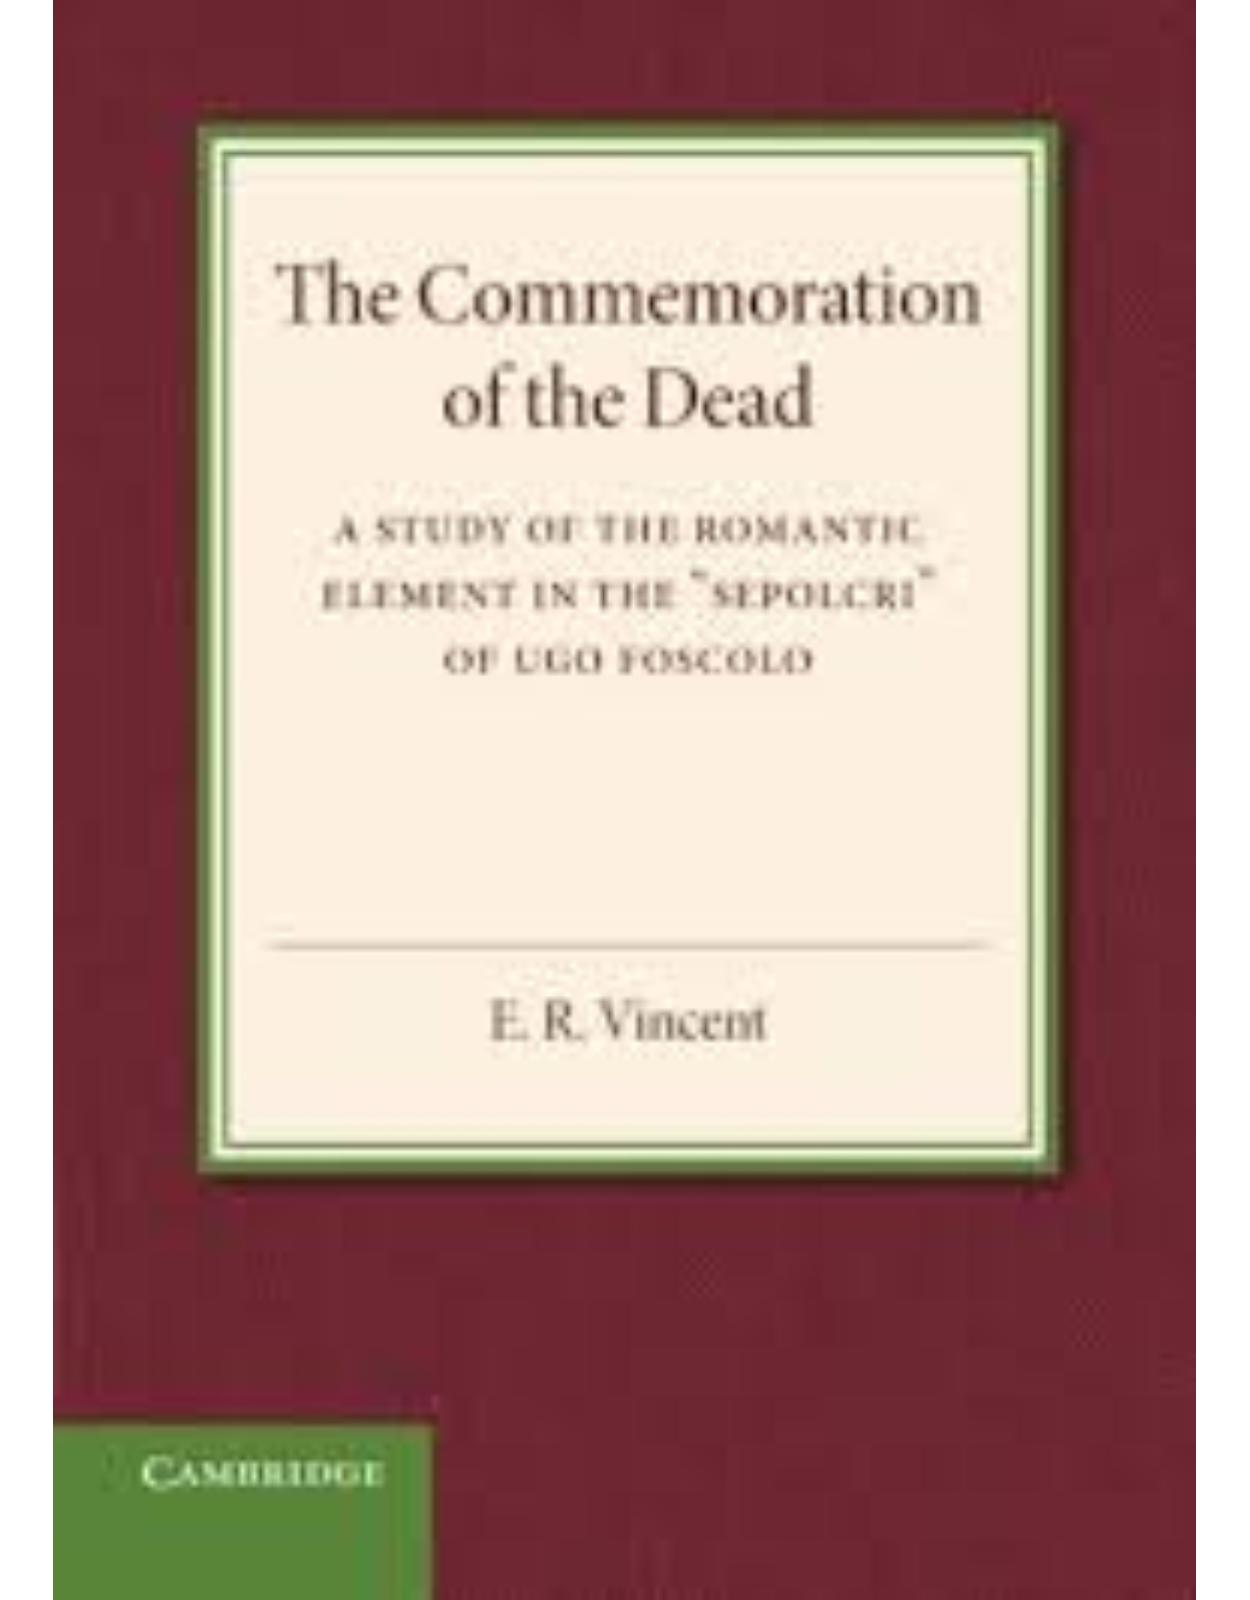 The Commemoration of the Dead: An Inaugural Lecture